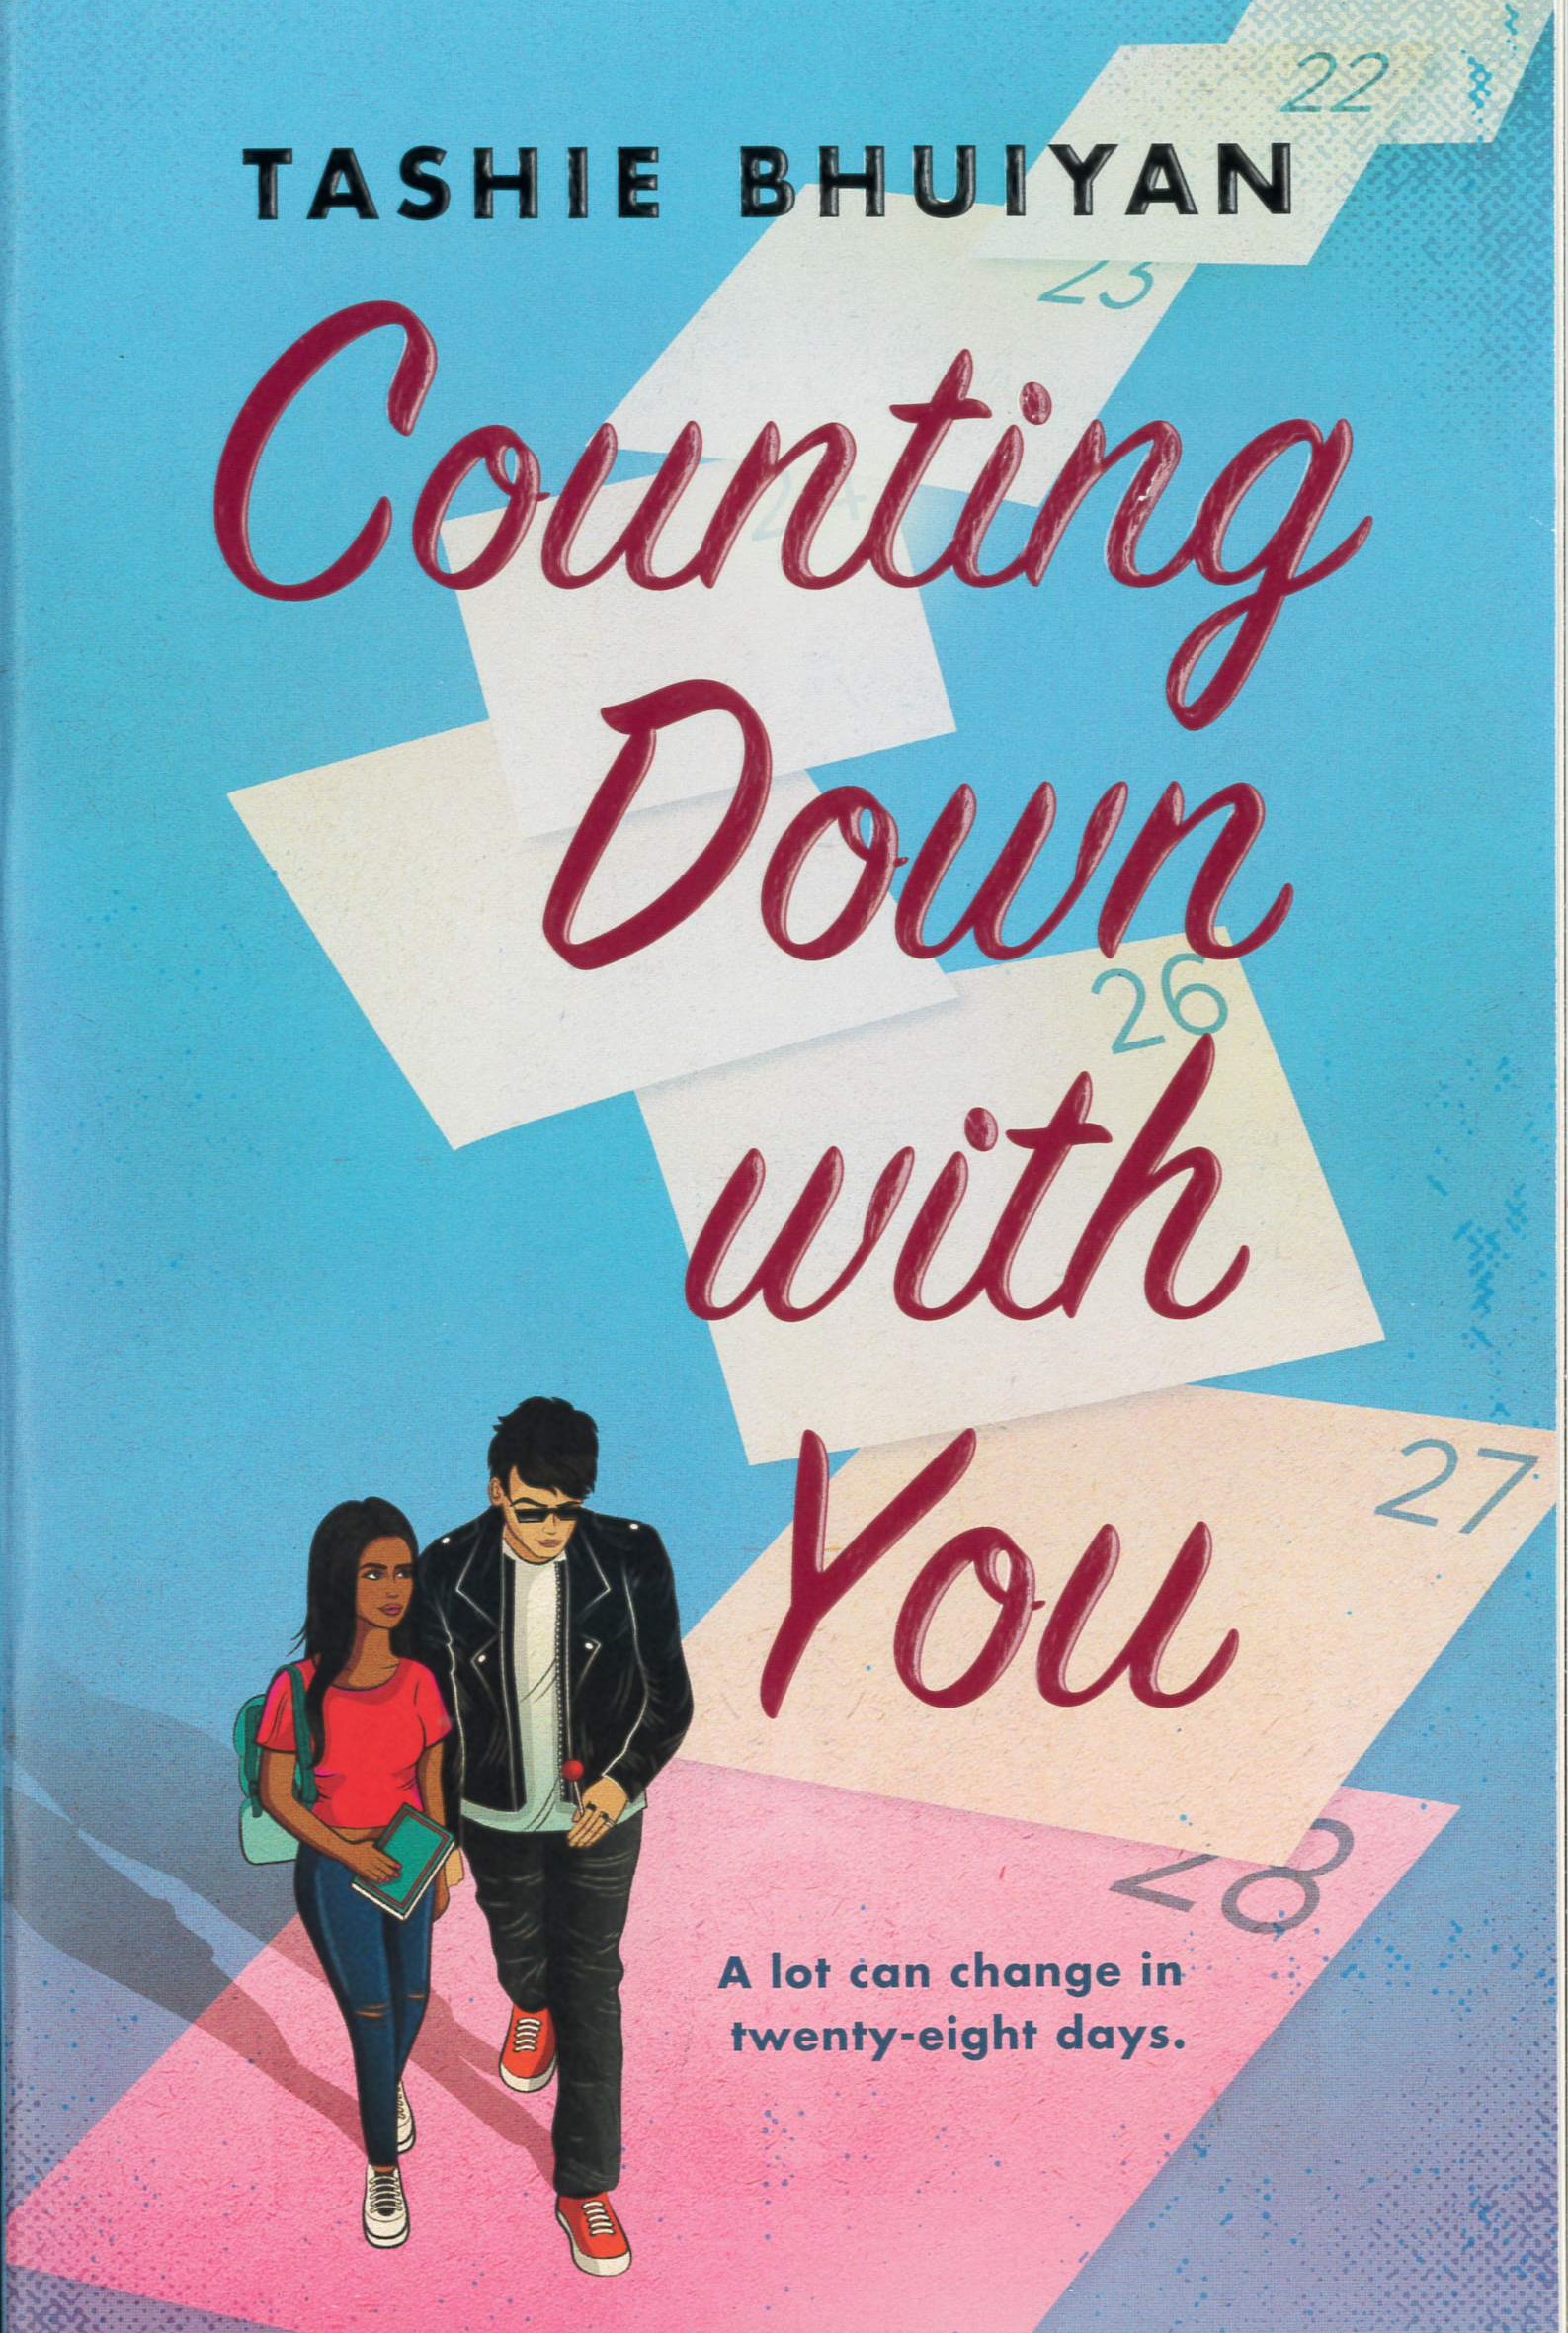 Counting down with you /